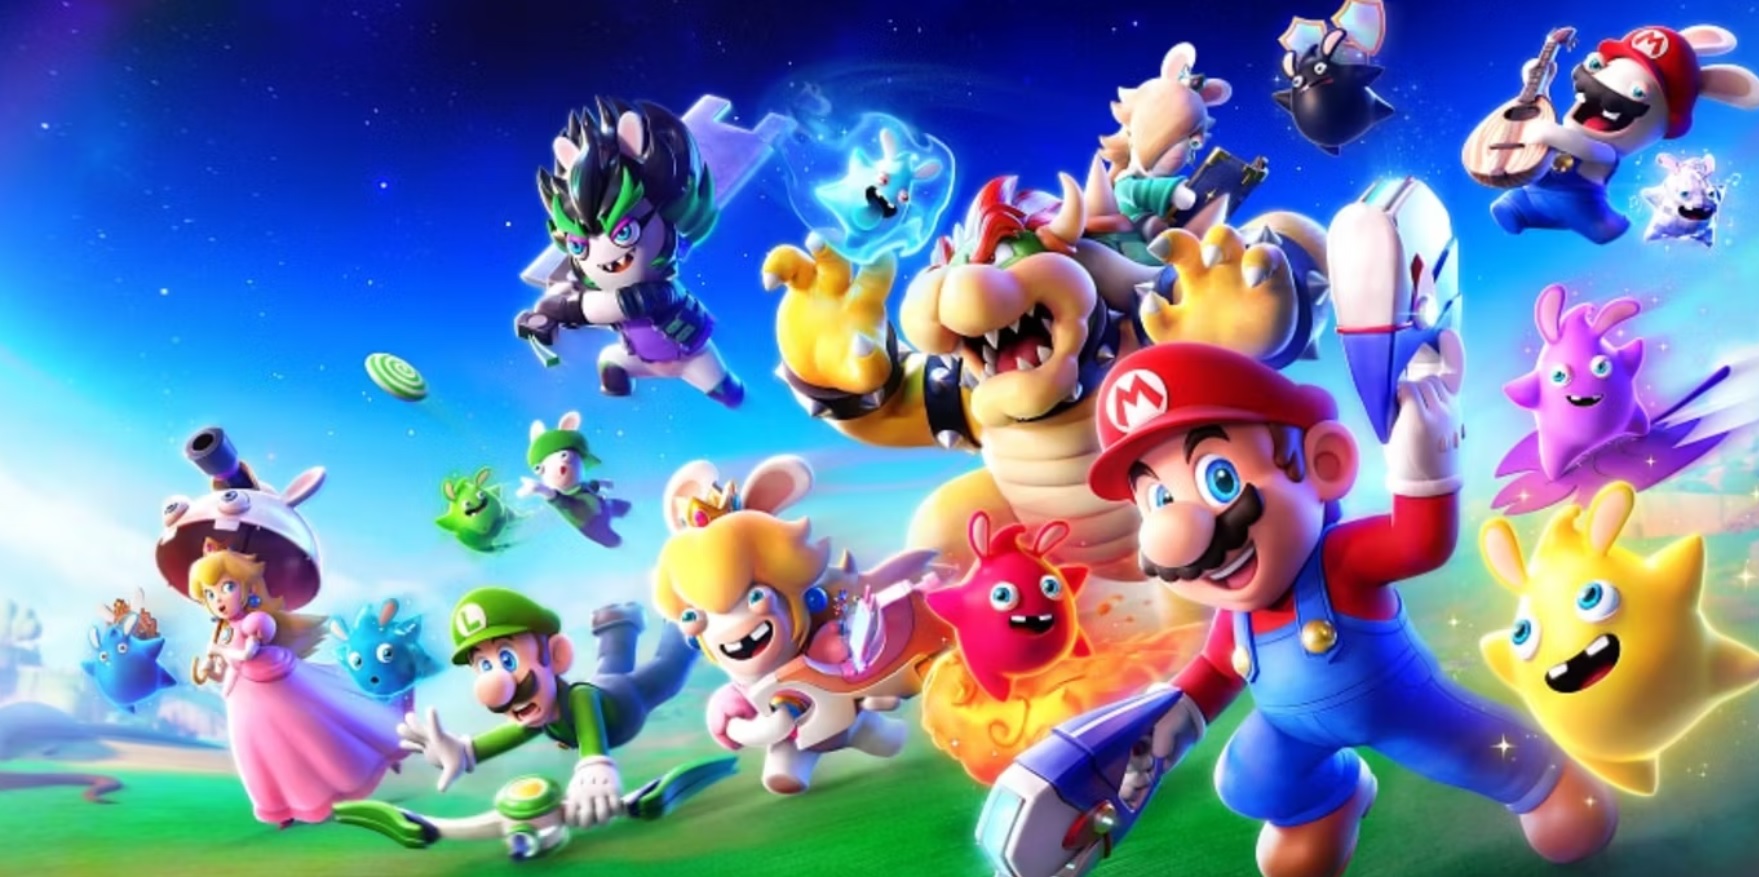 Review in Progress: Mario + Rabbids Sparks of Hope – Destructoid